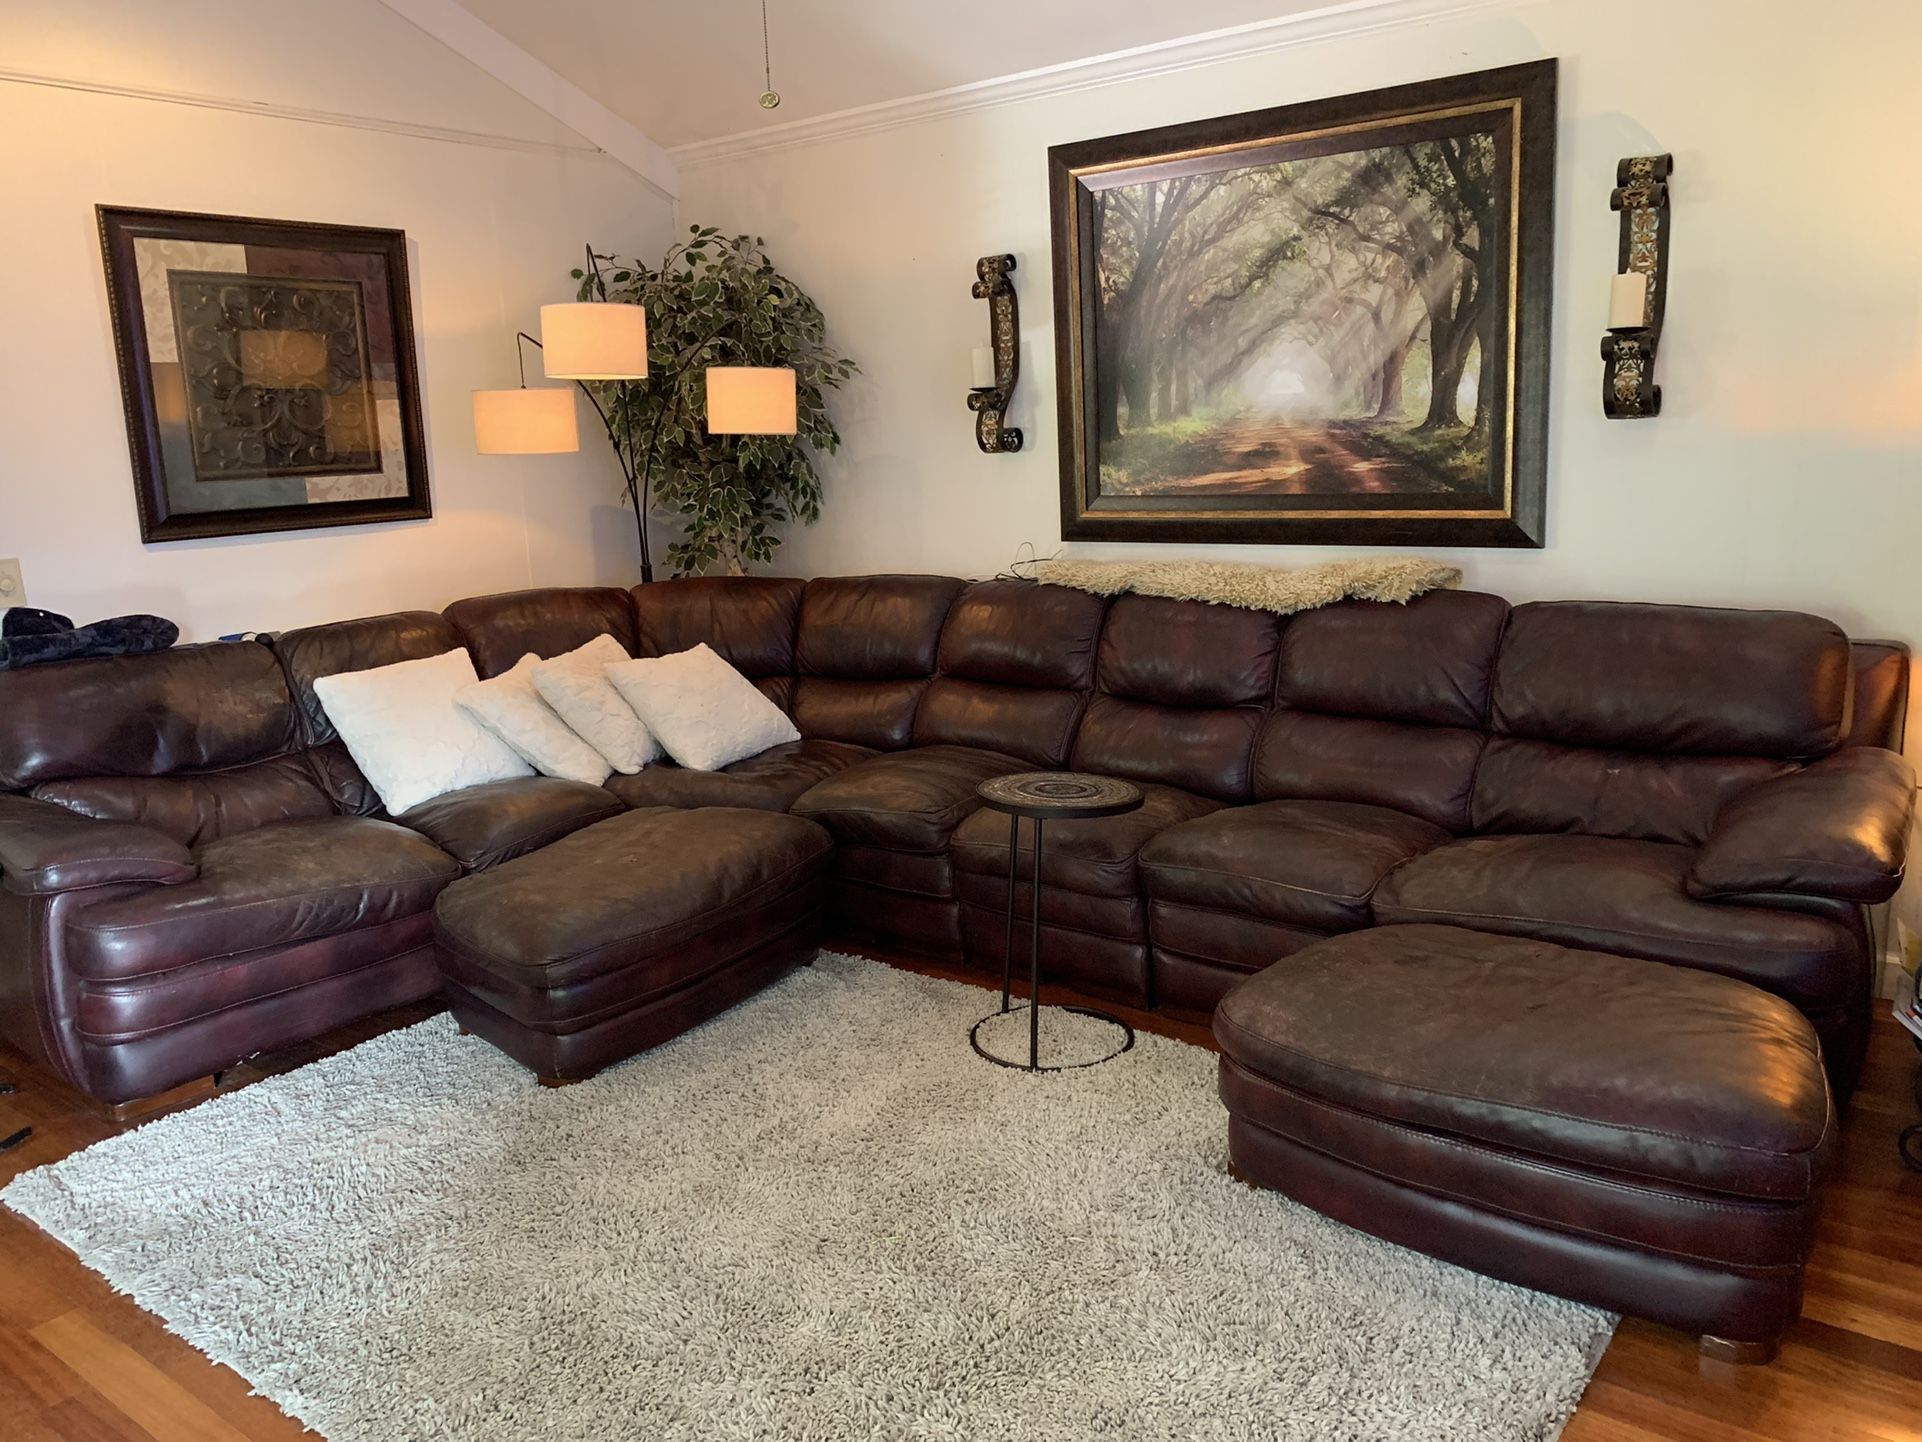 Mahagony  leather sectional  For large living area!